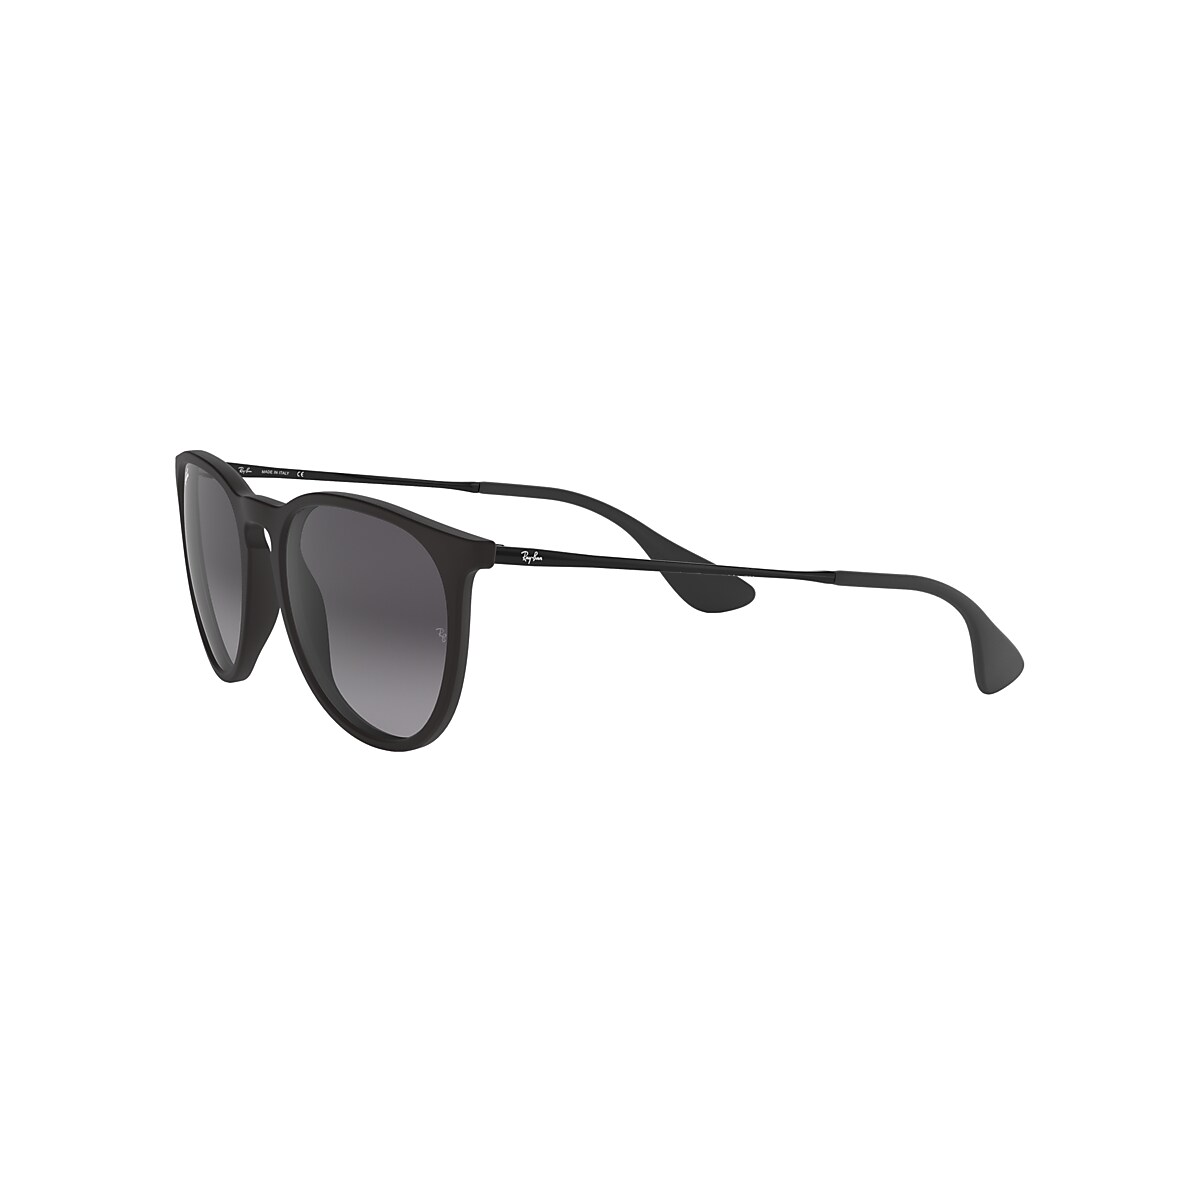 ERIKA CLASSIC Sunglasses in Black and Grey - RB4171F | Ray-Ban® US